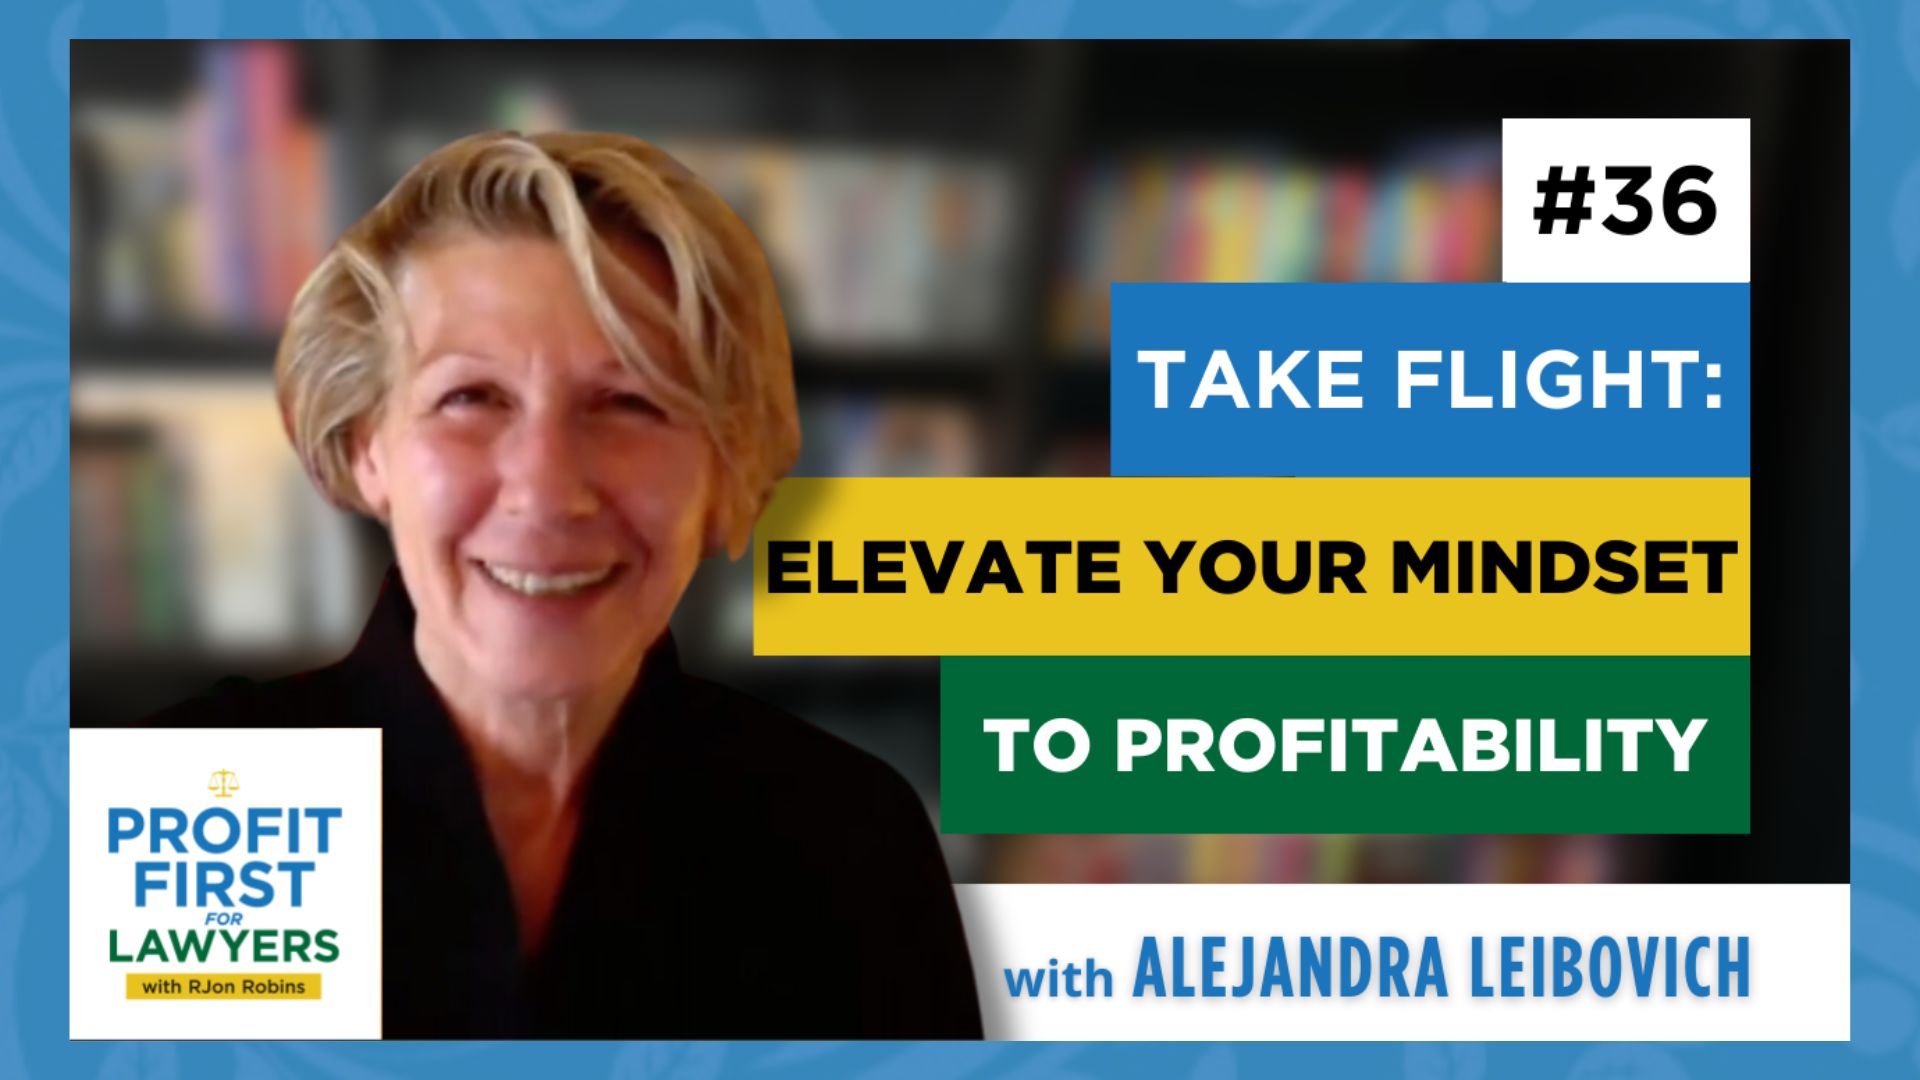 featured image of Alejandra Leibovich for Ep 36 of the Profit First For Lawyers podcast titled, "Take Flight: Elevate Your Mindset to Profitability."